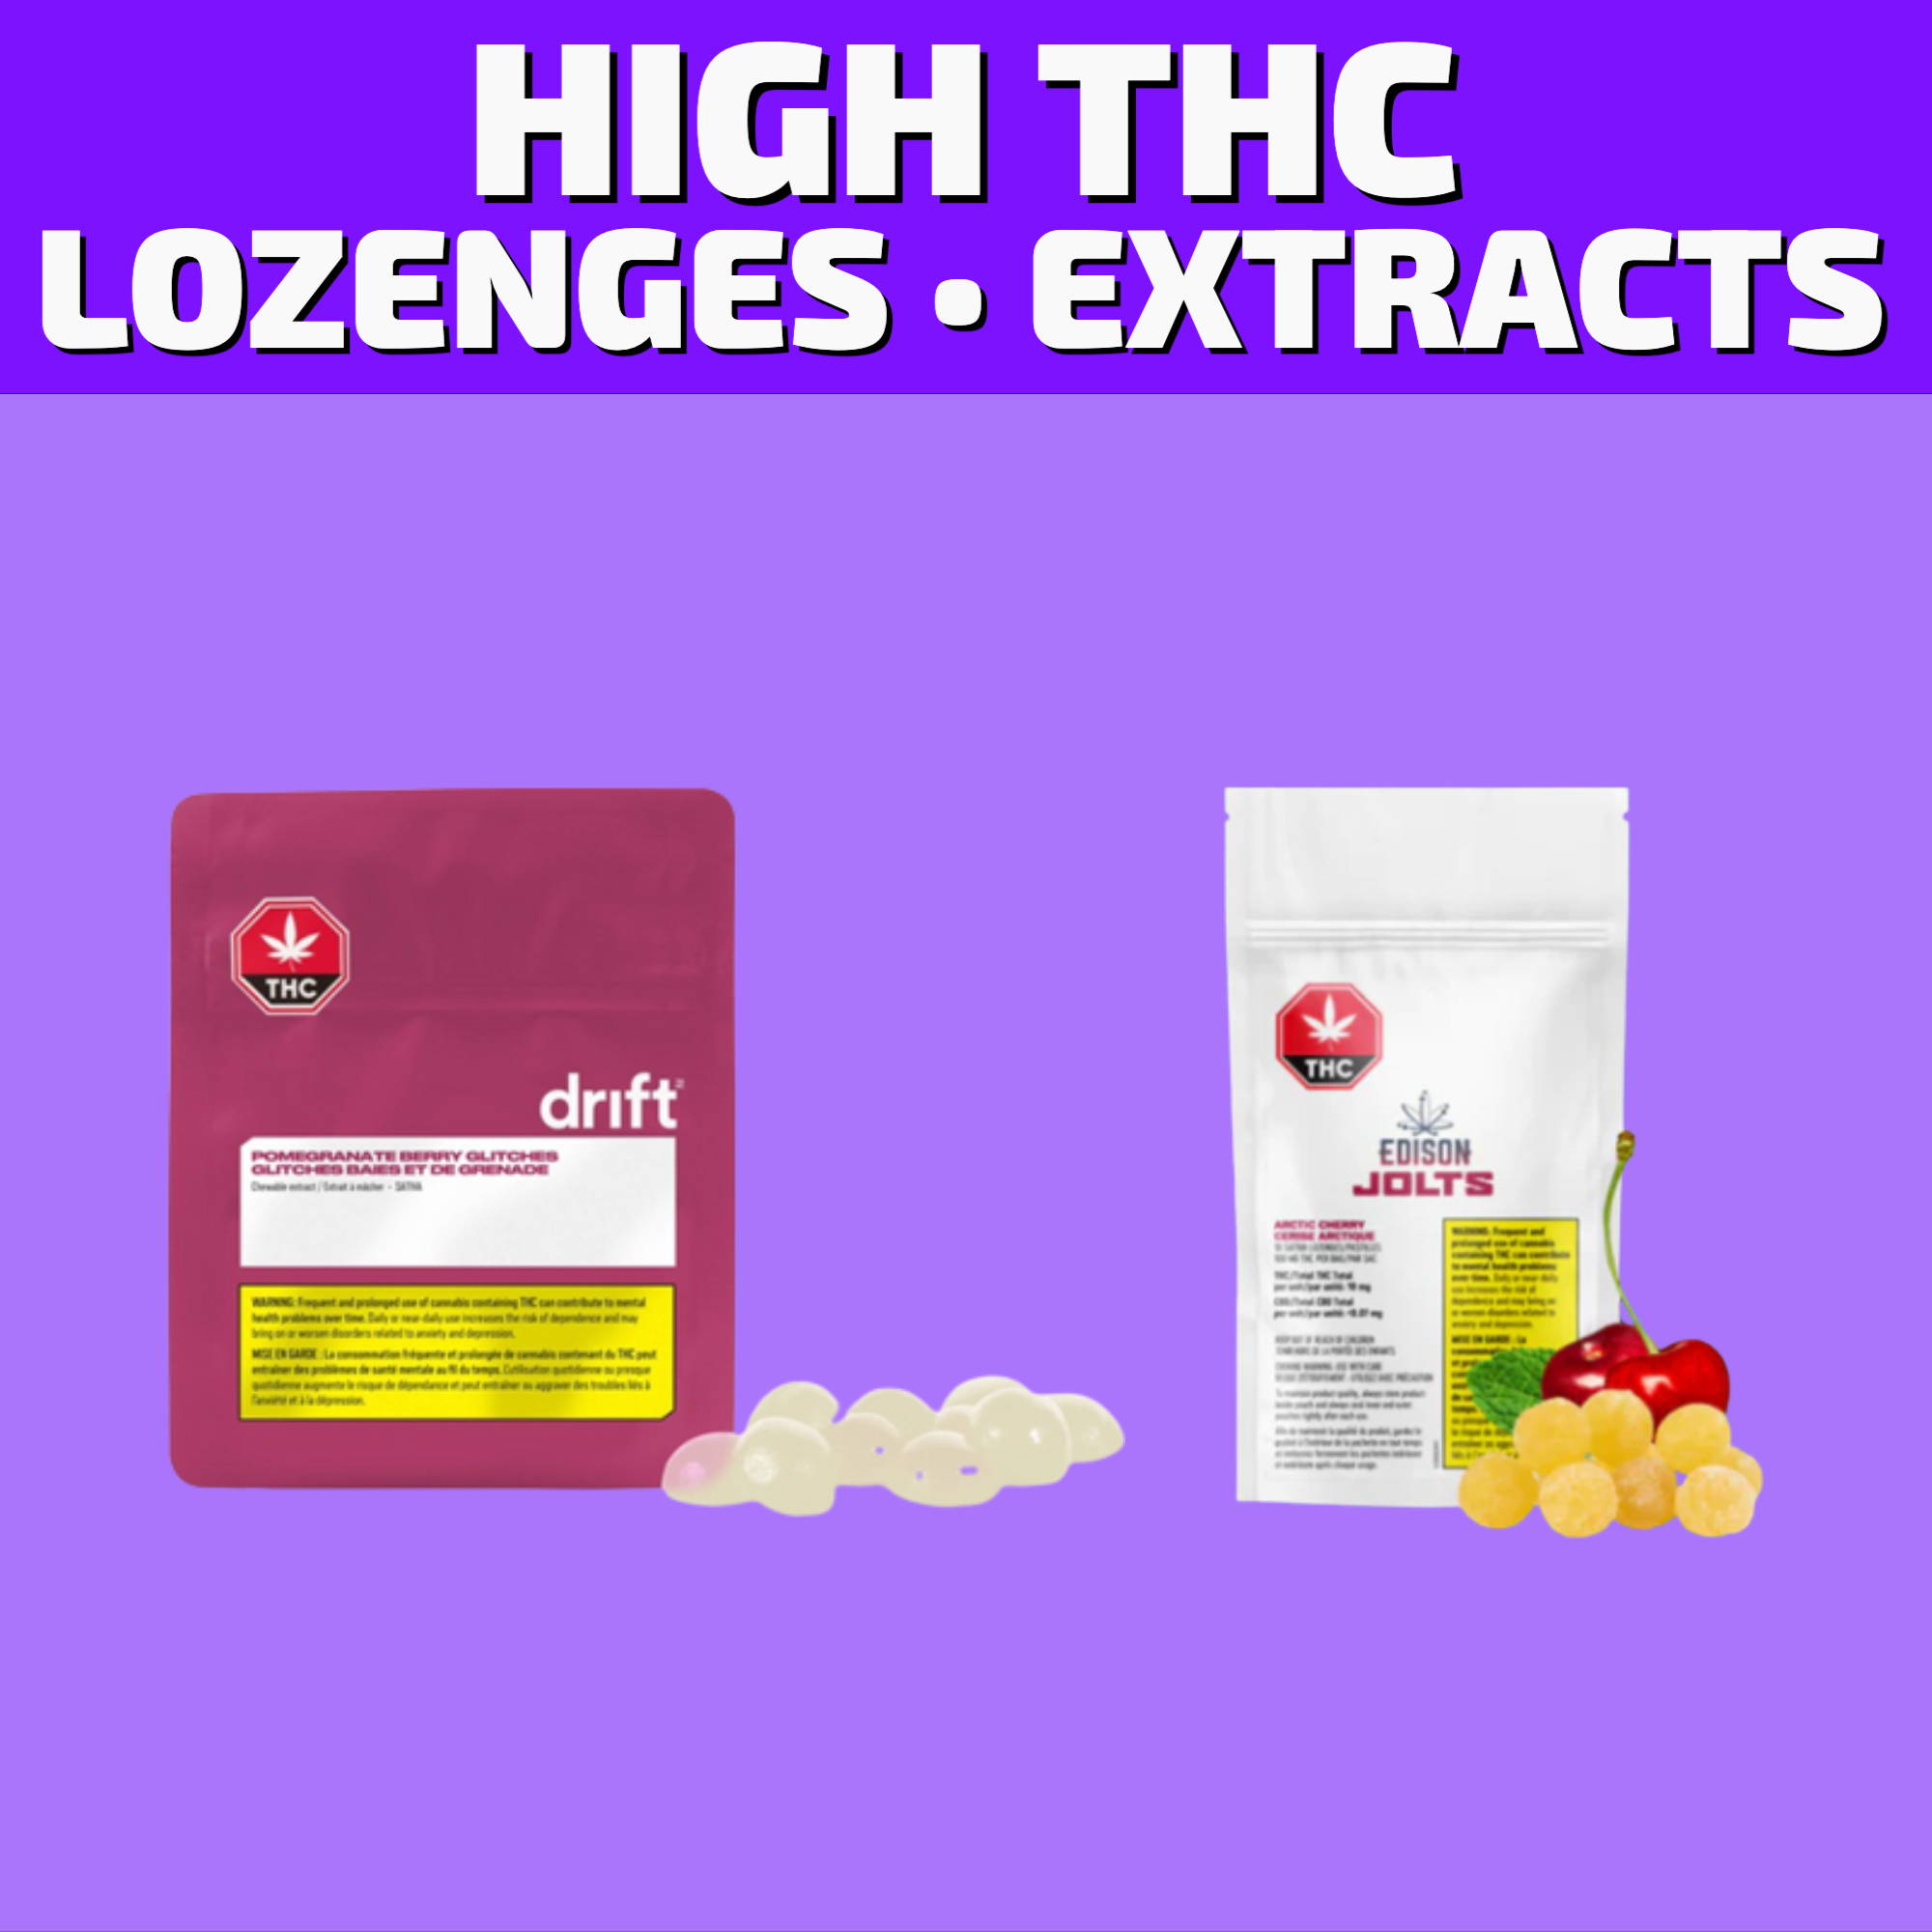 Buy high THC lozenges and edibles online for same day delivery or buy them in-store at 580 Academy Road.